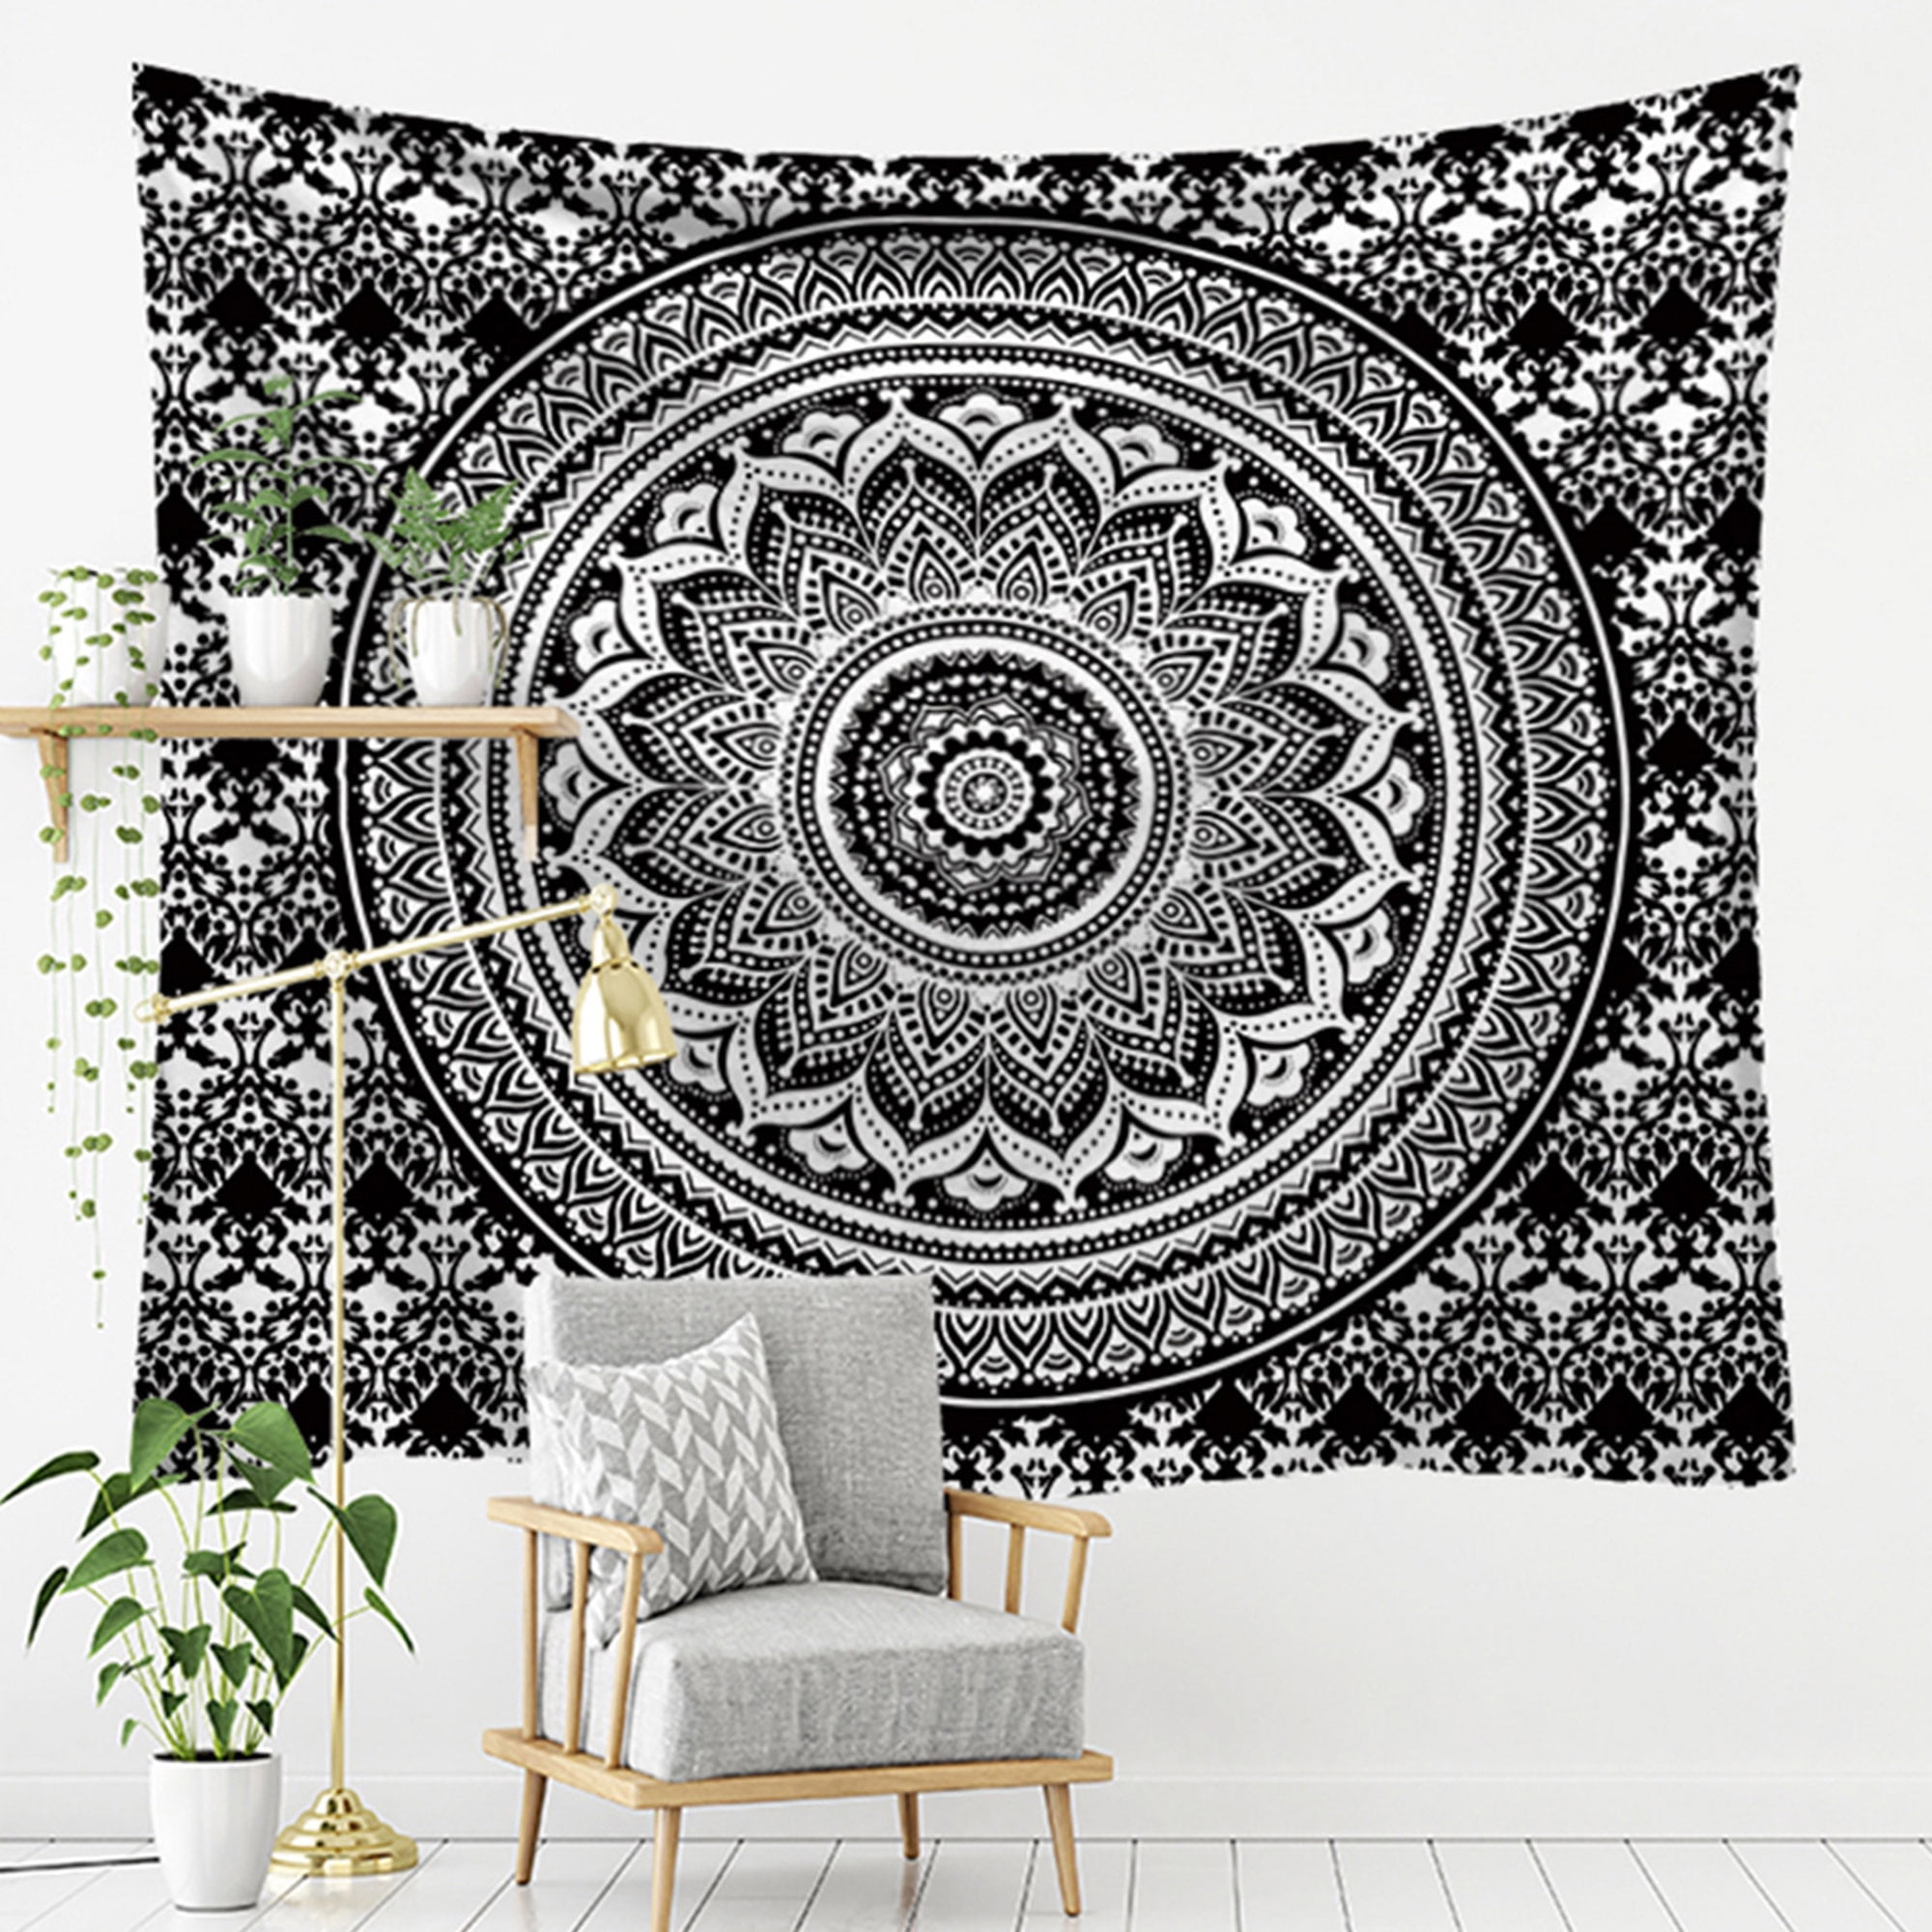 Tapestry Flower Wall Hanging Bohemian Throw Blankets for Home Living Rom Decor 